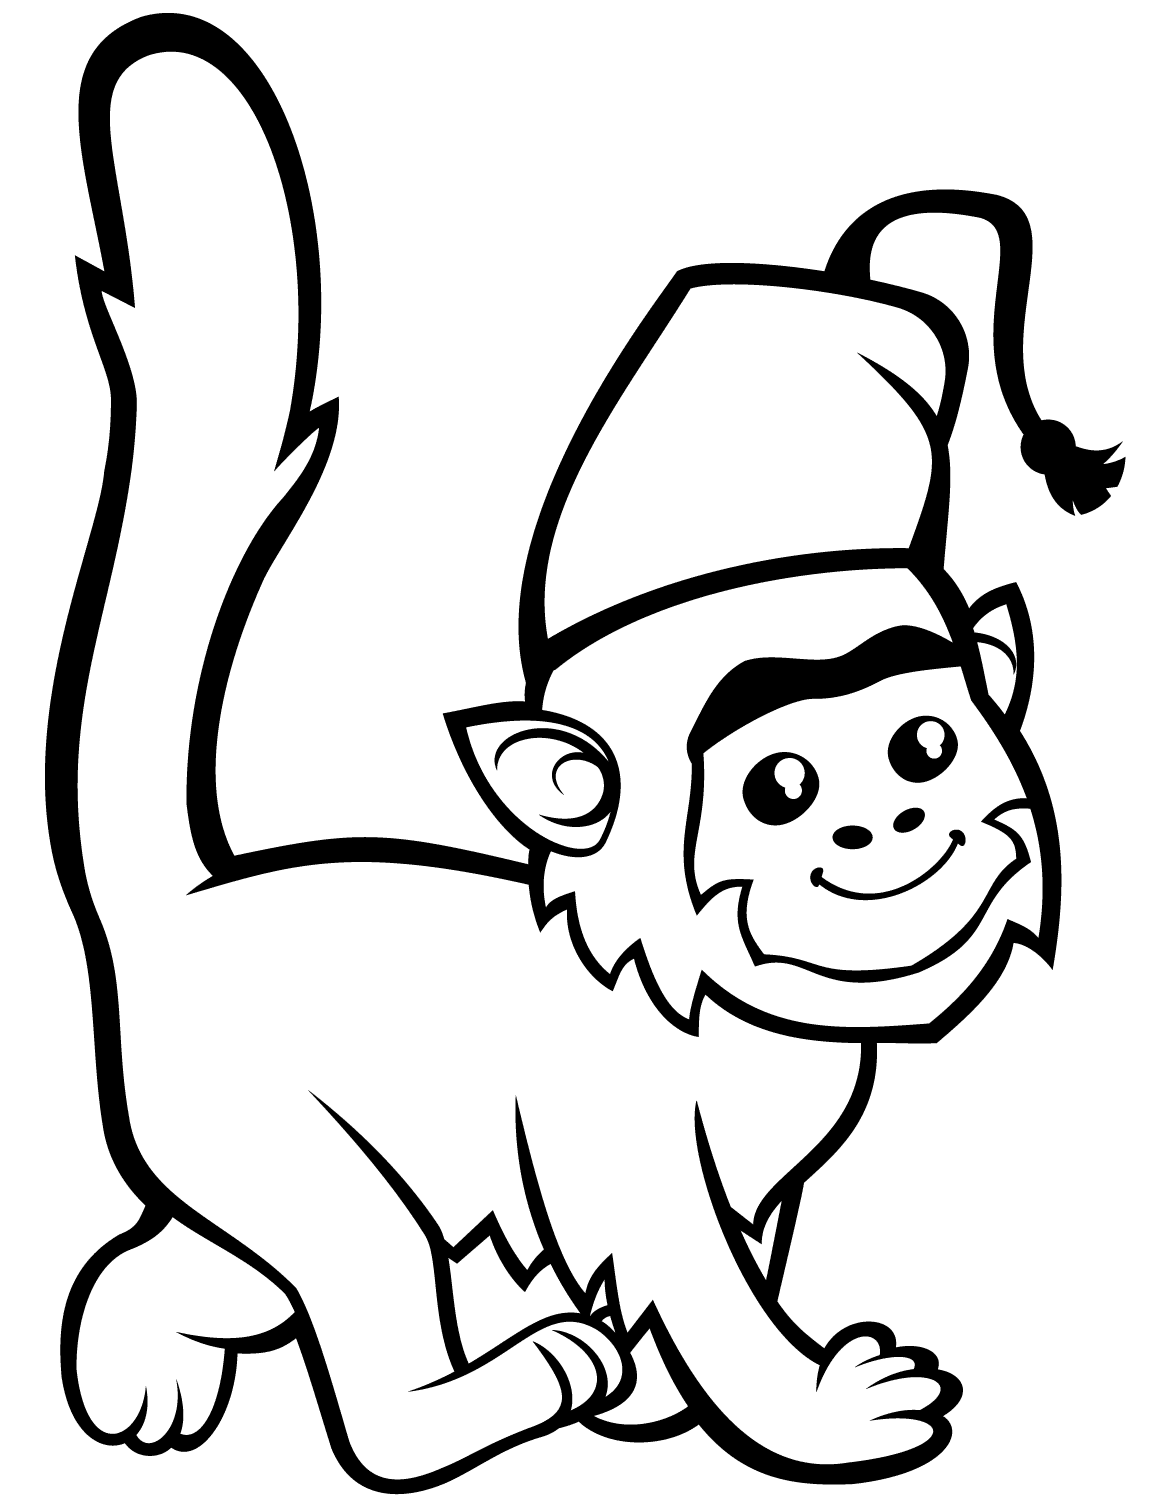 Monkey In Fez Coloring Page